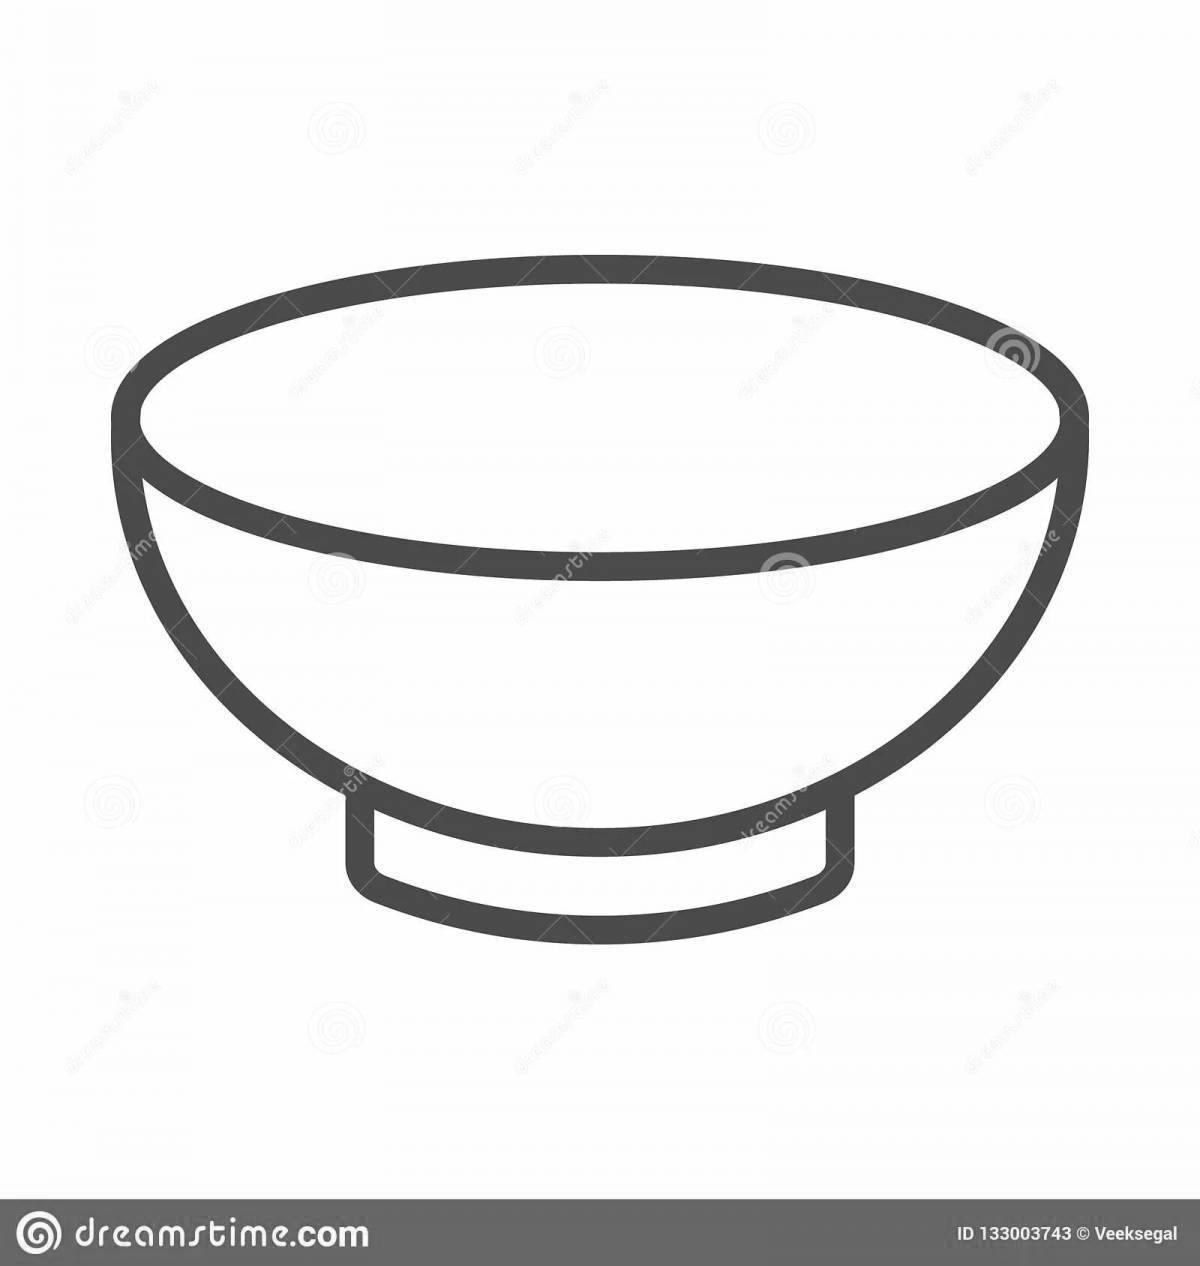 Amazing soup plate coloring page